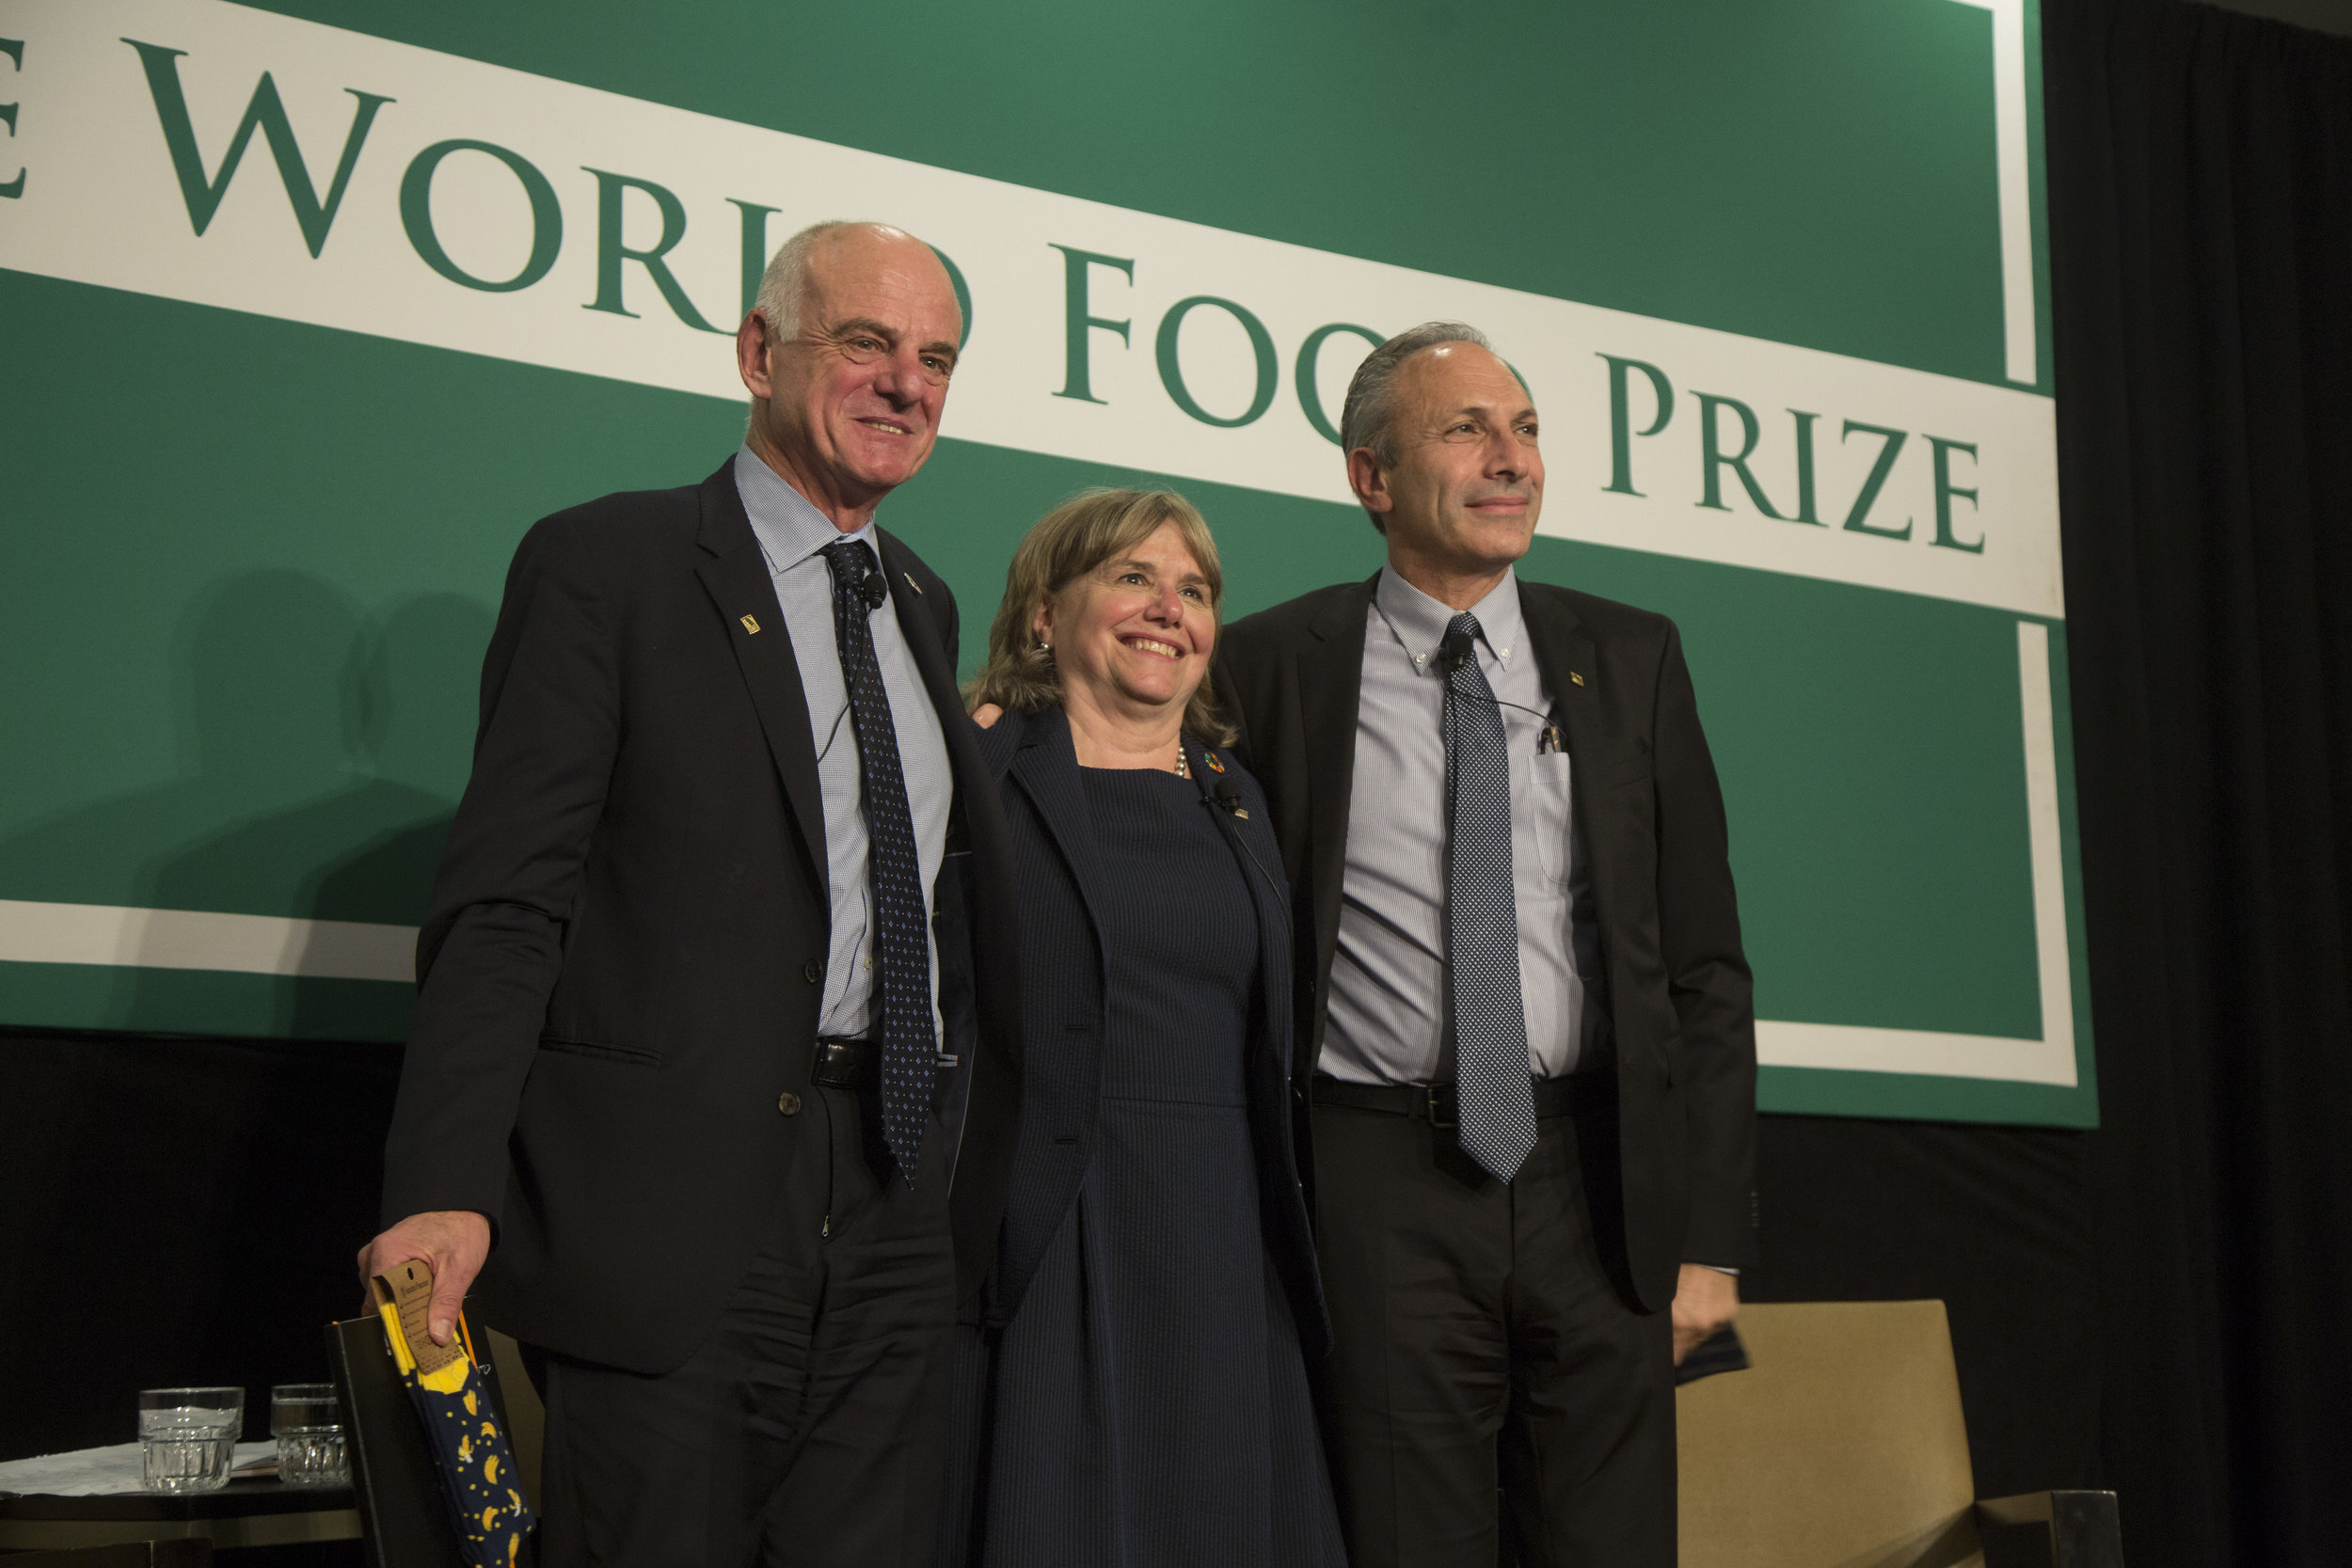  2018 World Food Prize Laureates, Dr. David Nabarro, Dr. Lawrence Haddad at their Laureate Panel Moderated by Catherine Bertini 